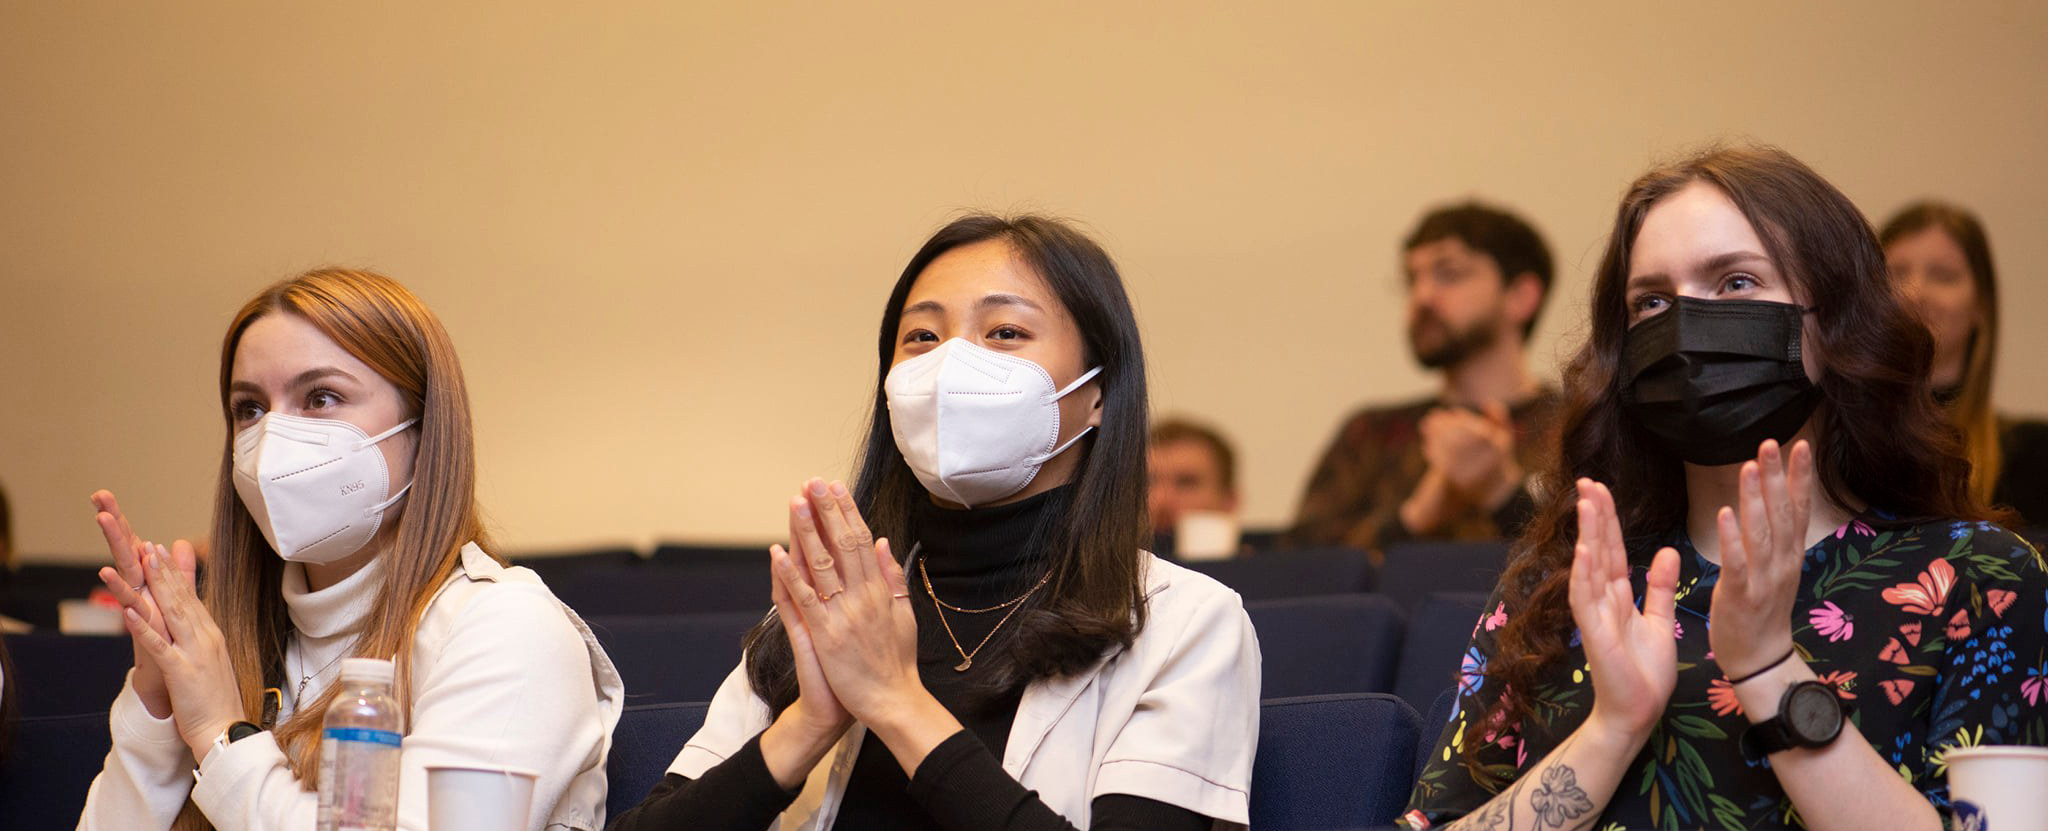 Writers Marie-Soleil (left) and Nancy Yang (middle) attend the symposium along with their lab mate Tetiana Povshedna (right)